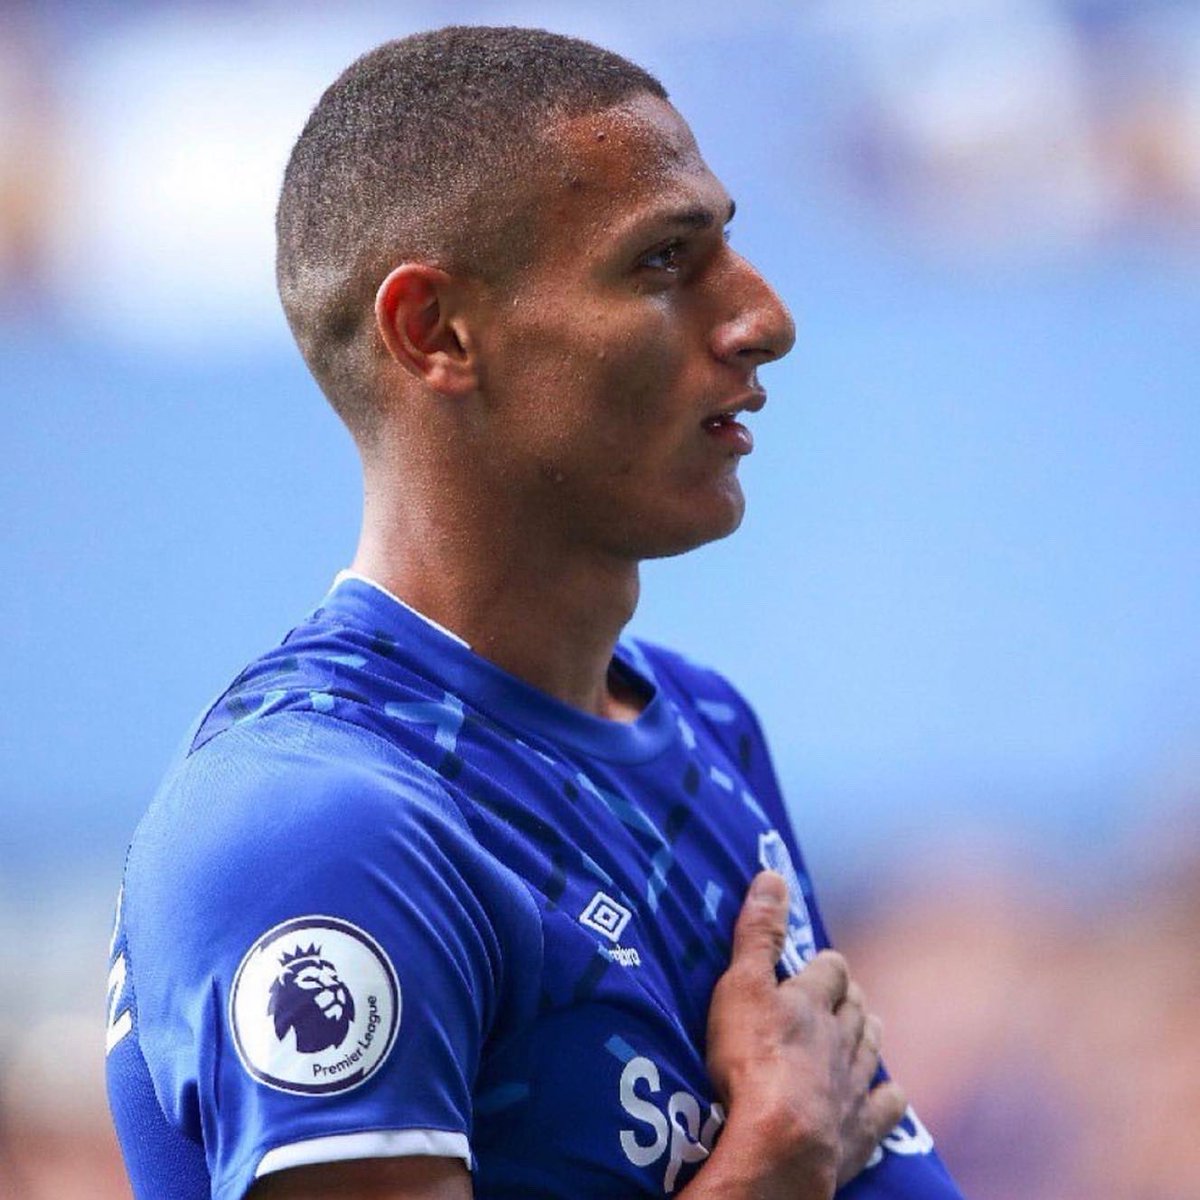 What Is The Meaning Of Brazilian Forward Richarlison Tattoo? Details About His Parents Antônio Carlos Andrade & Vera Lucia